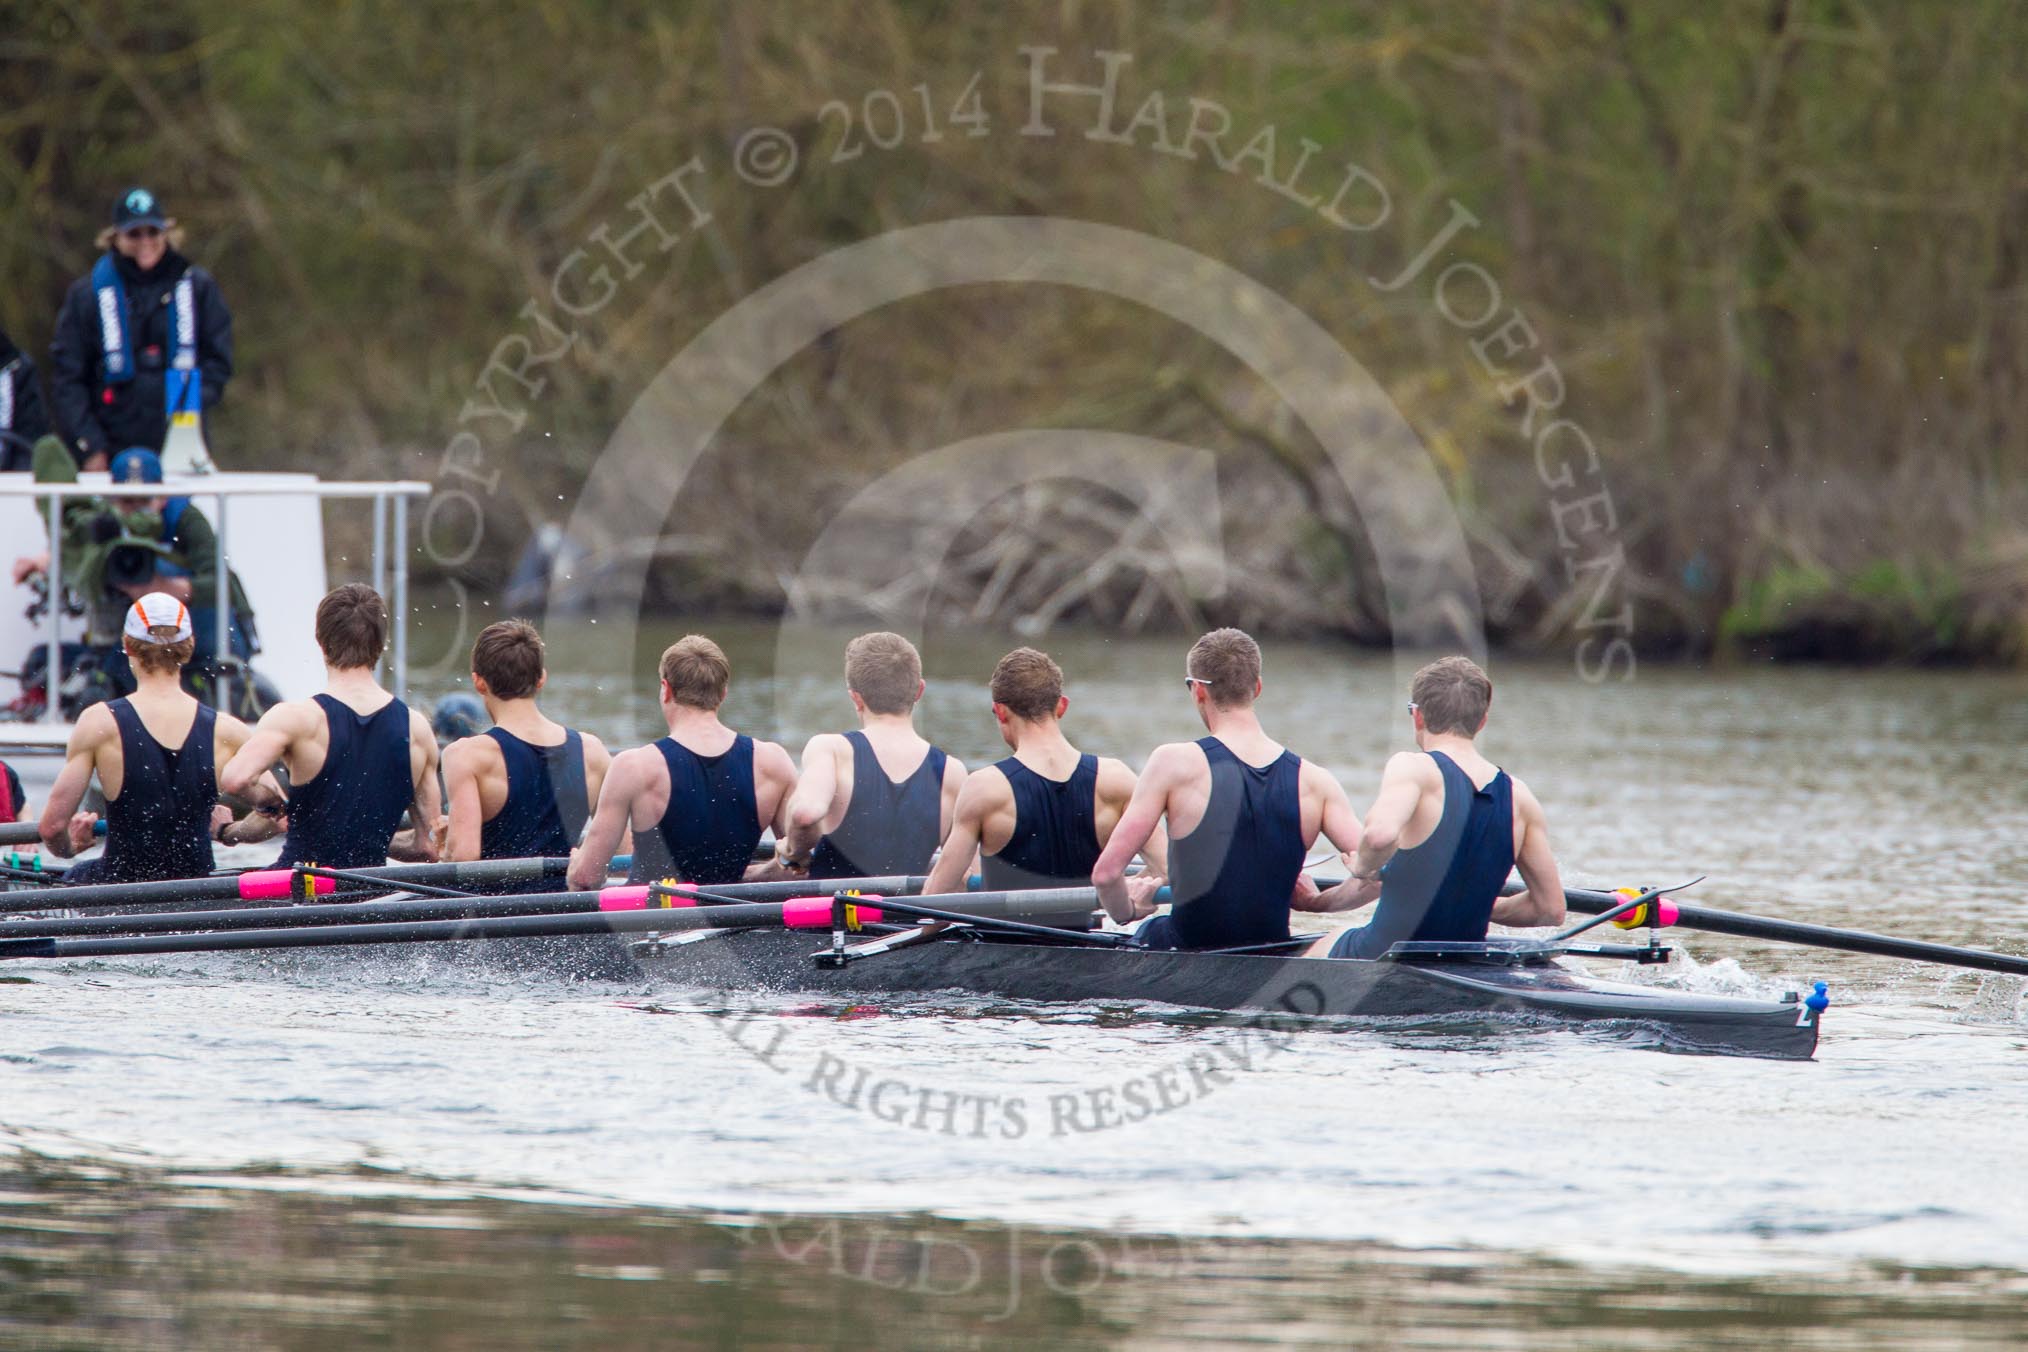 The Women's Boat Race and Henley Boat Races 2014: The Lightweight Men's Boat Race - OULRC vs CULRC, The Oxford boat is followed by the umpire's launch, with a TC cameraman in the front..
River Thames,
Henley-on-Thames,
Buckinghamshire,
United Kingdom,
on 30 March 2014 at 15:40, image #374